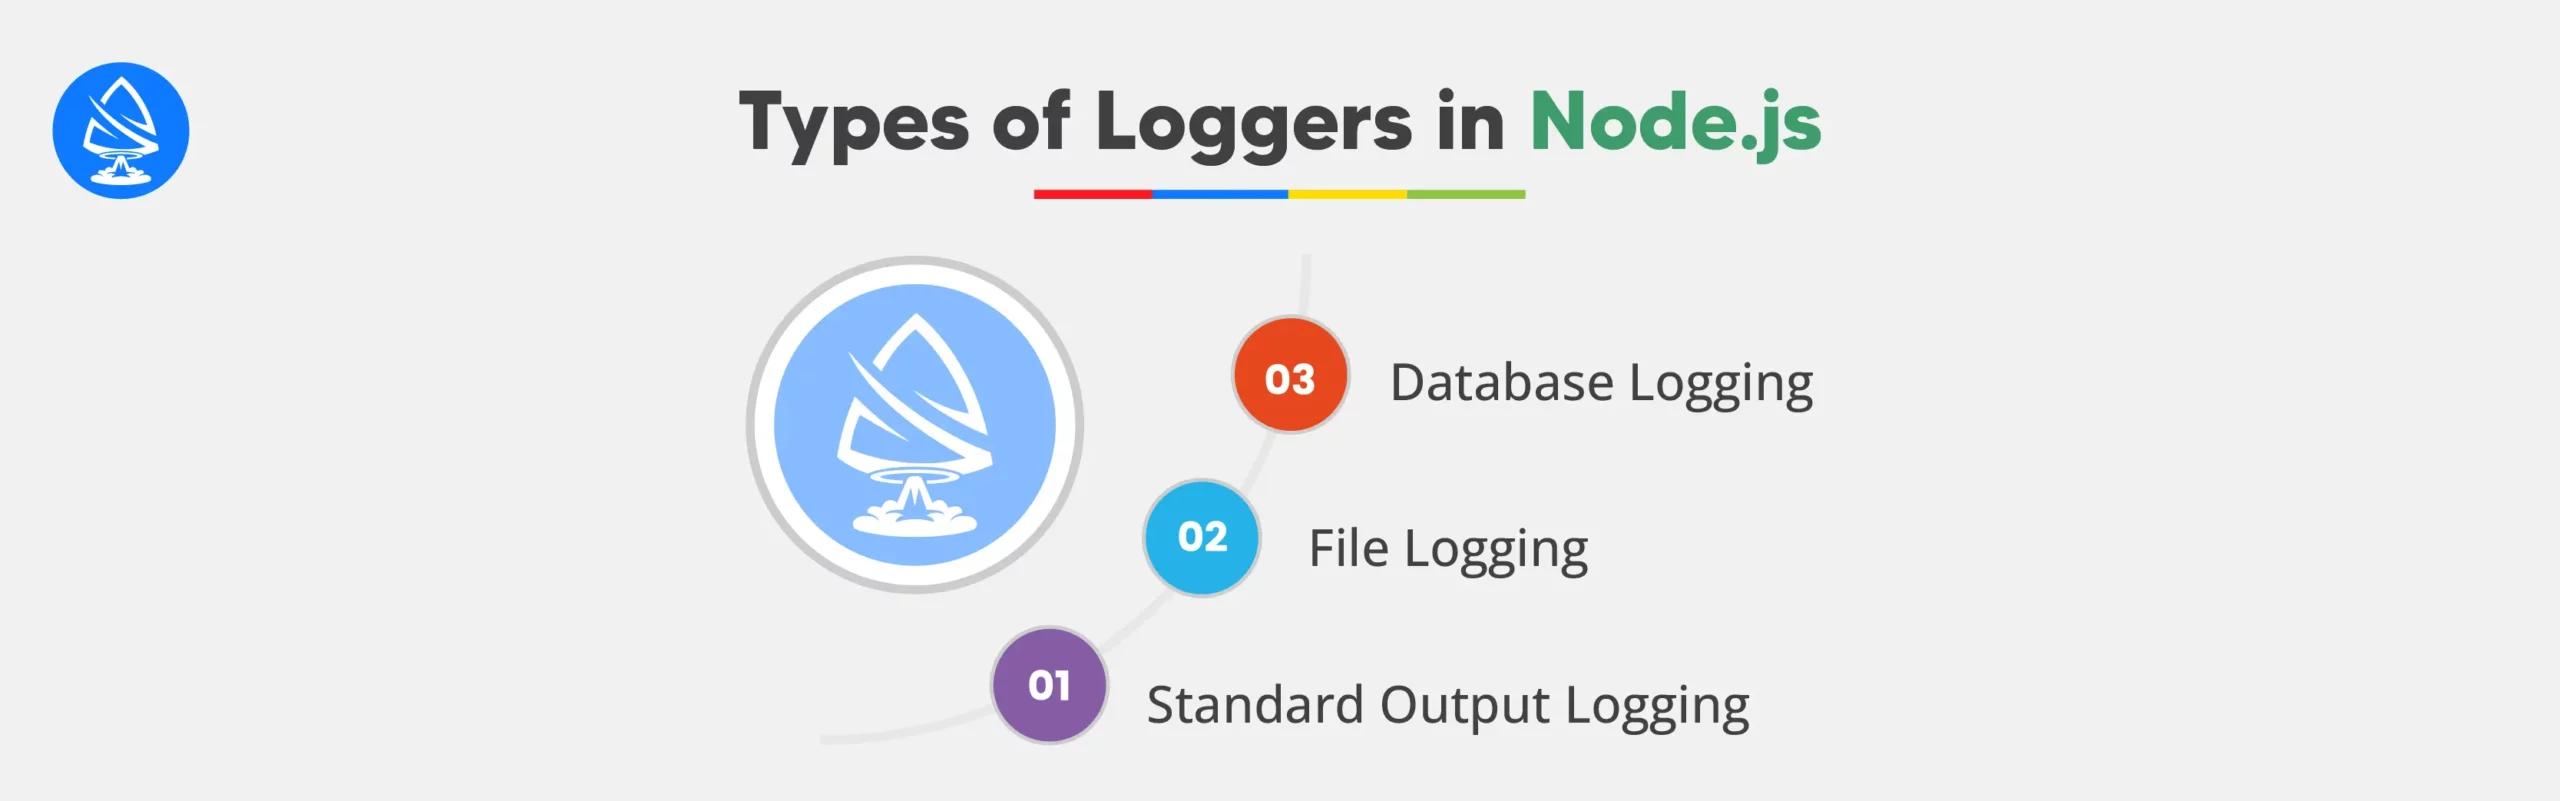 Types of Loggers For Node.js 